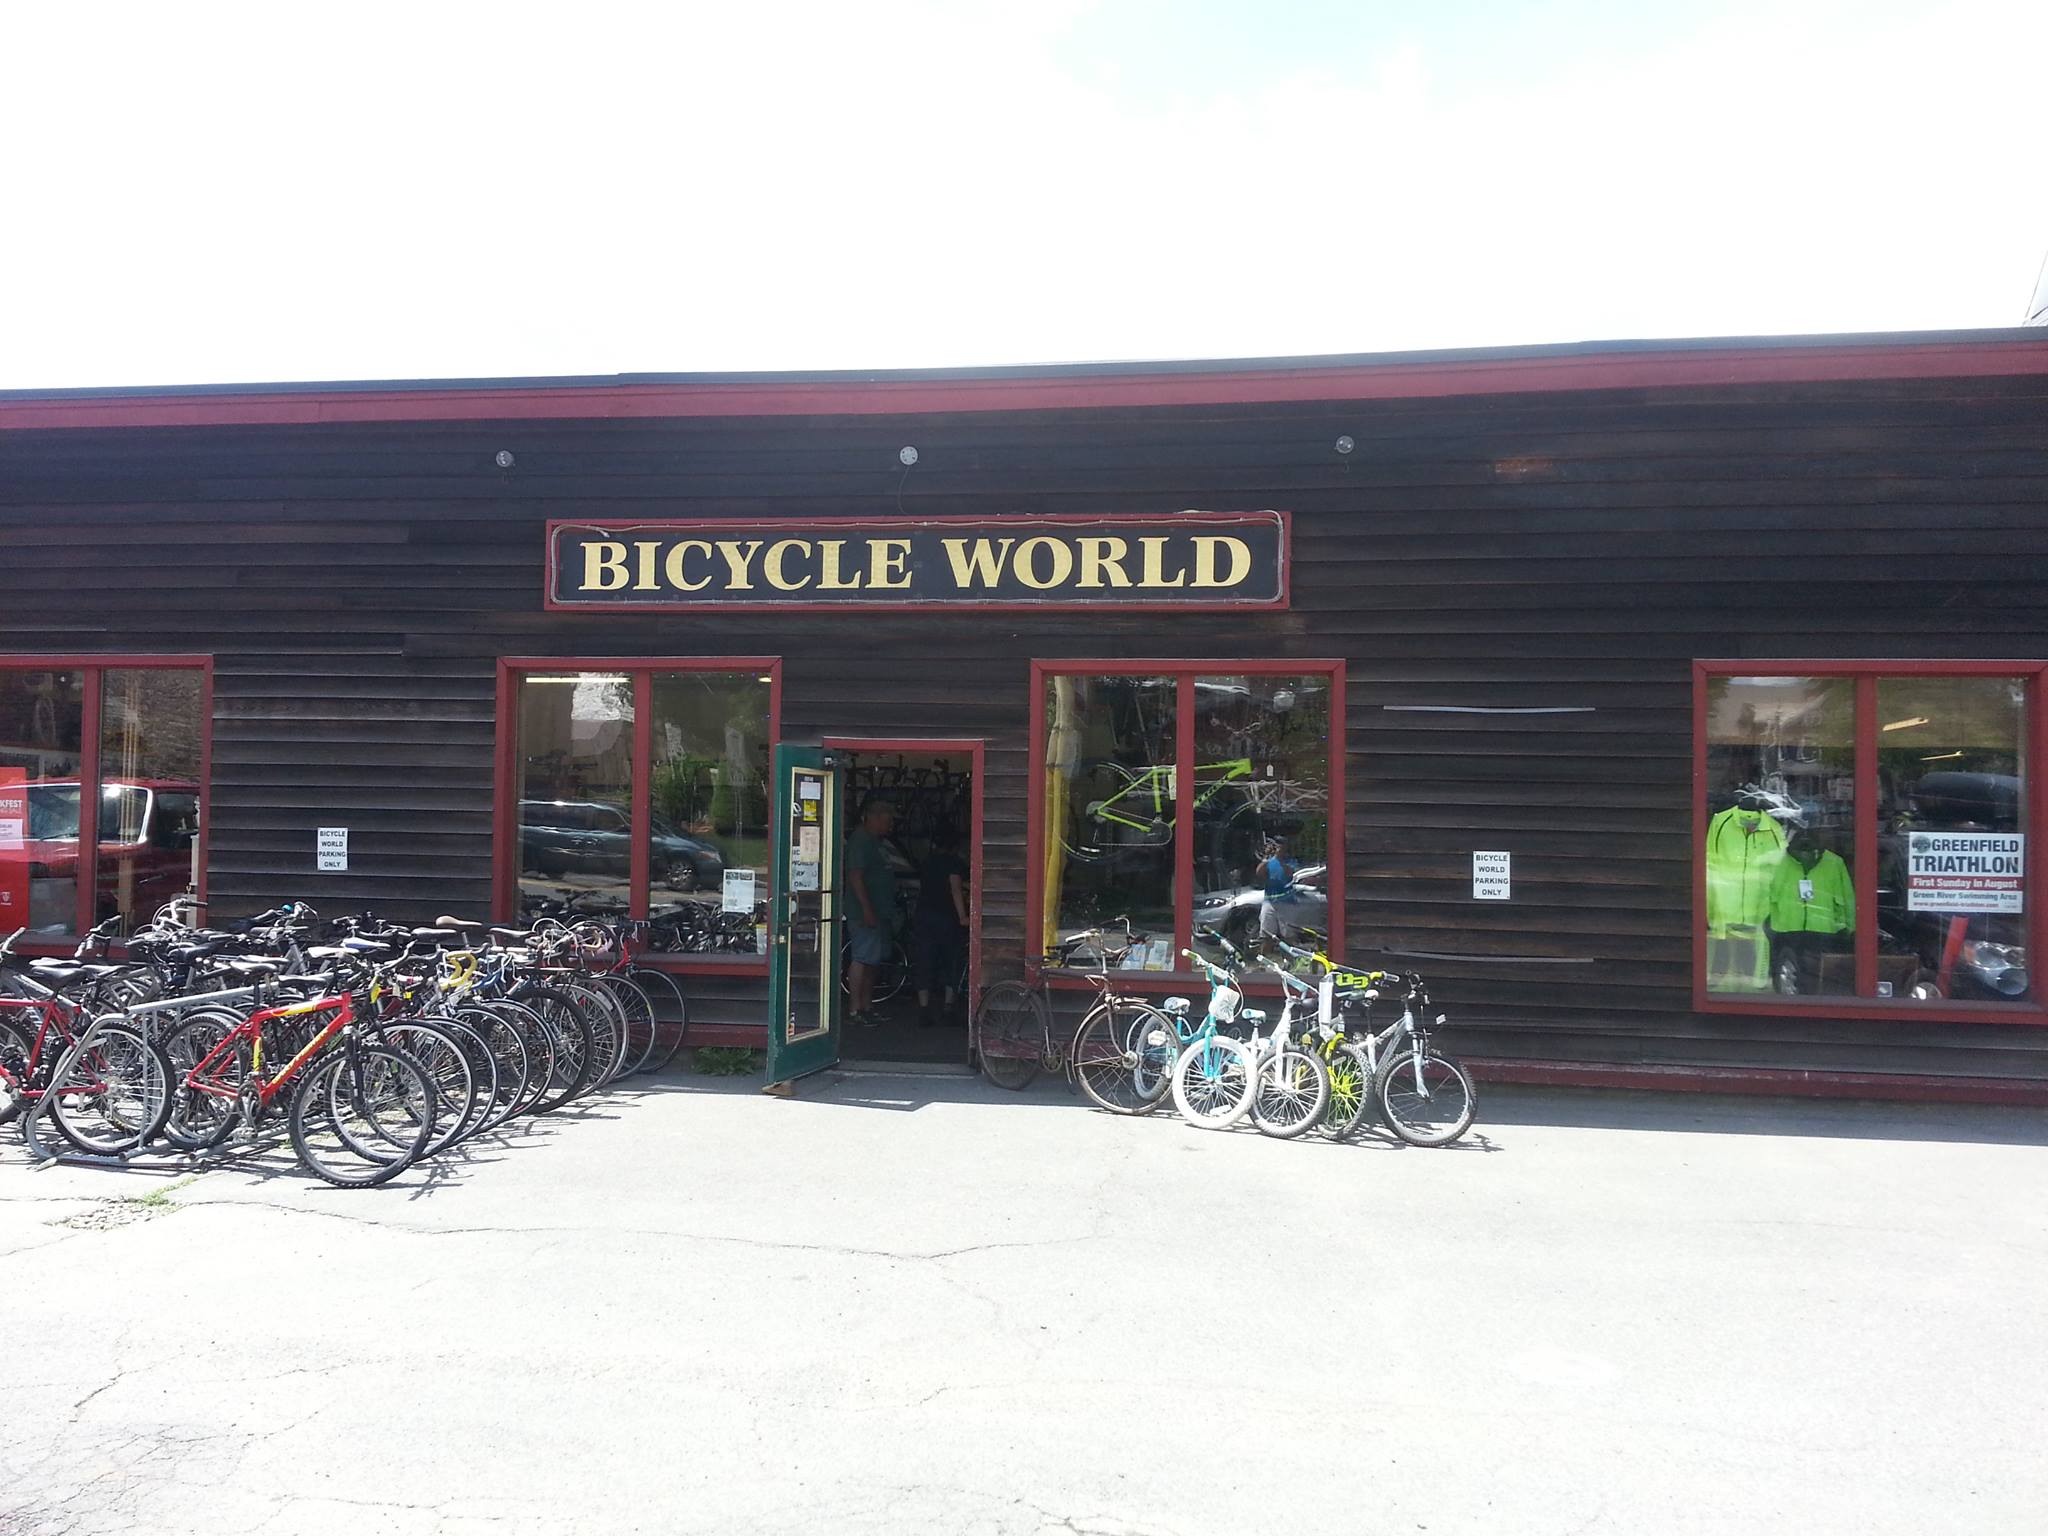 Welcome to Bicycle World